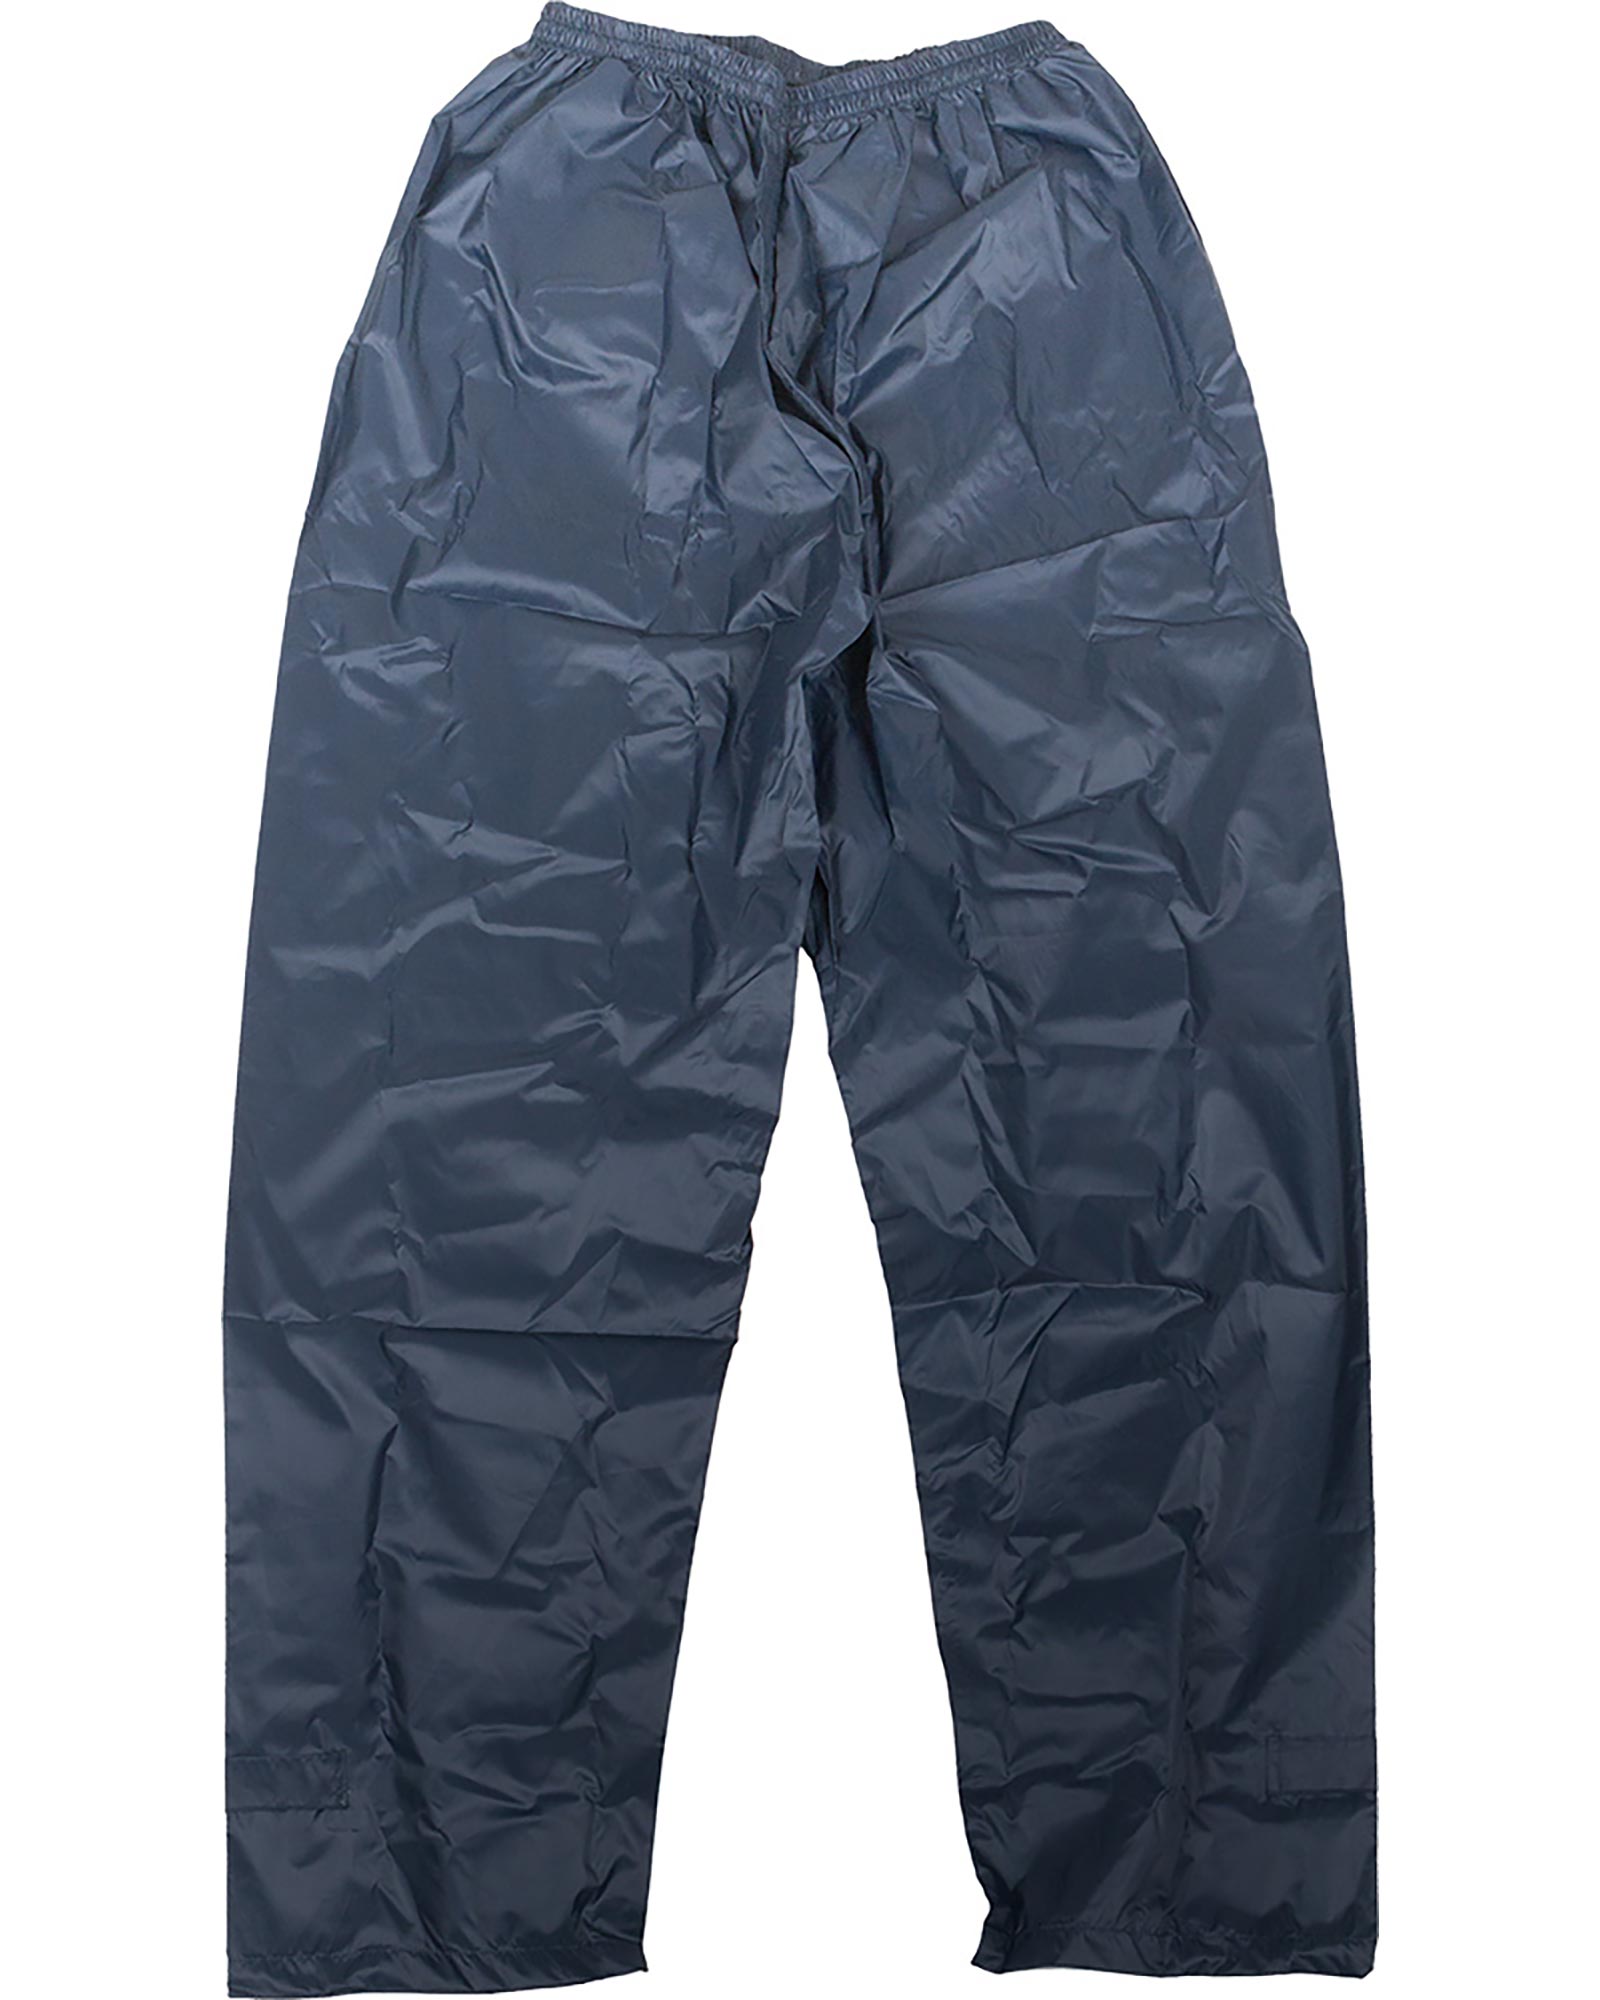 Target Dry Mac in a Sac Adult Packable Waterproof Overtrousers 0